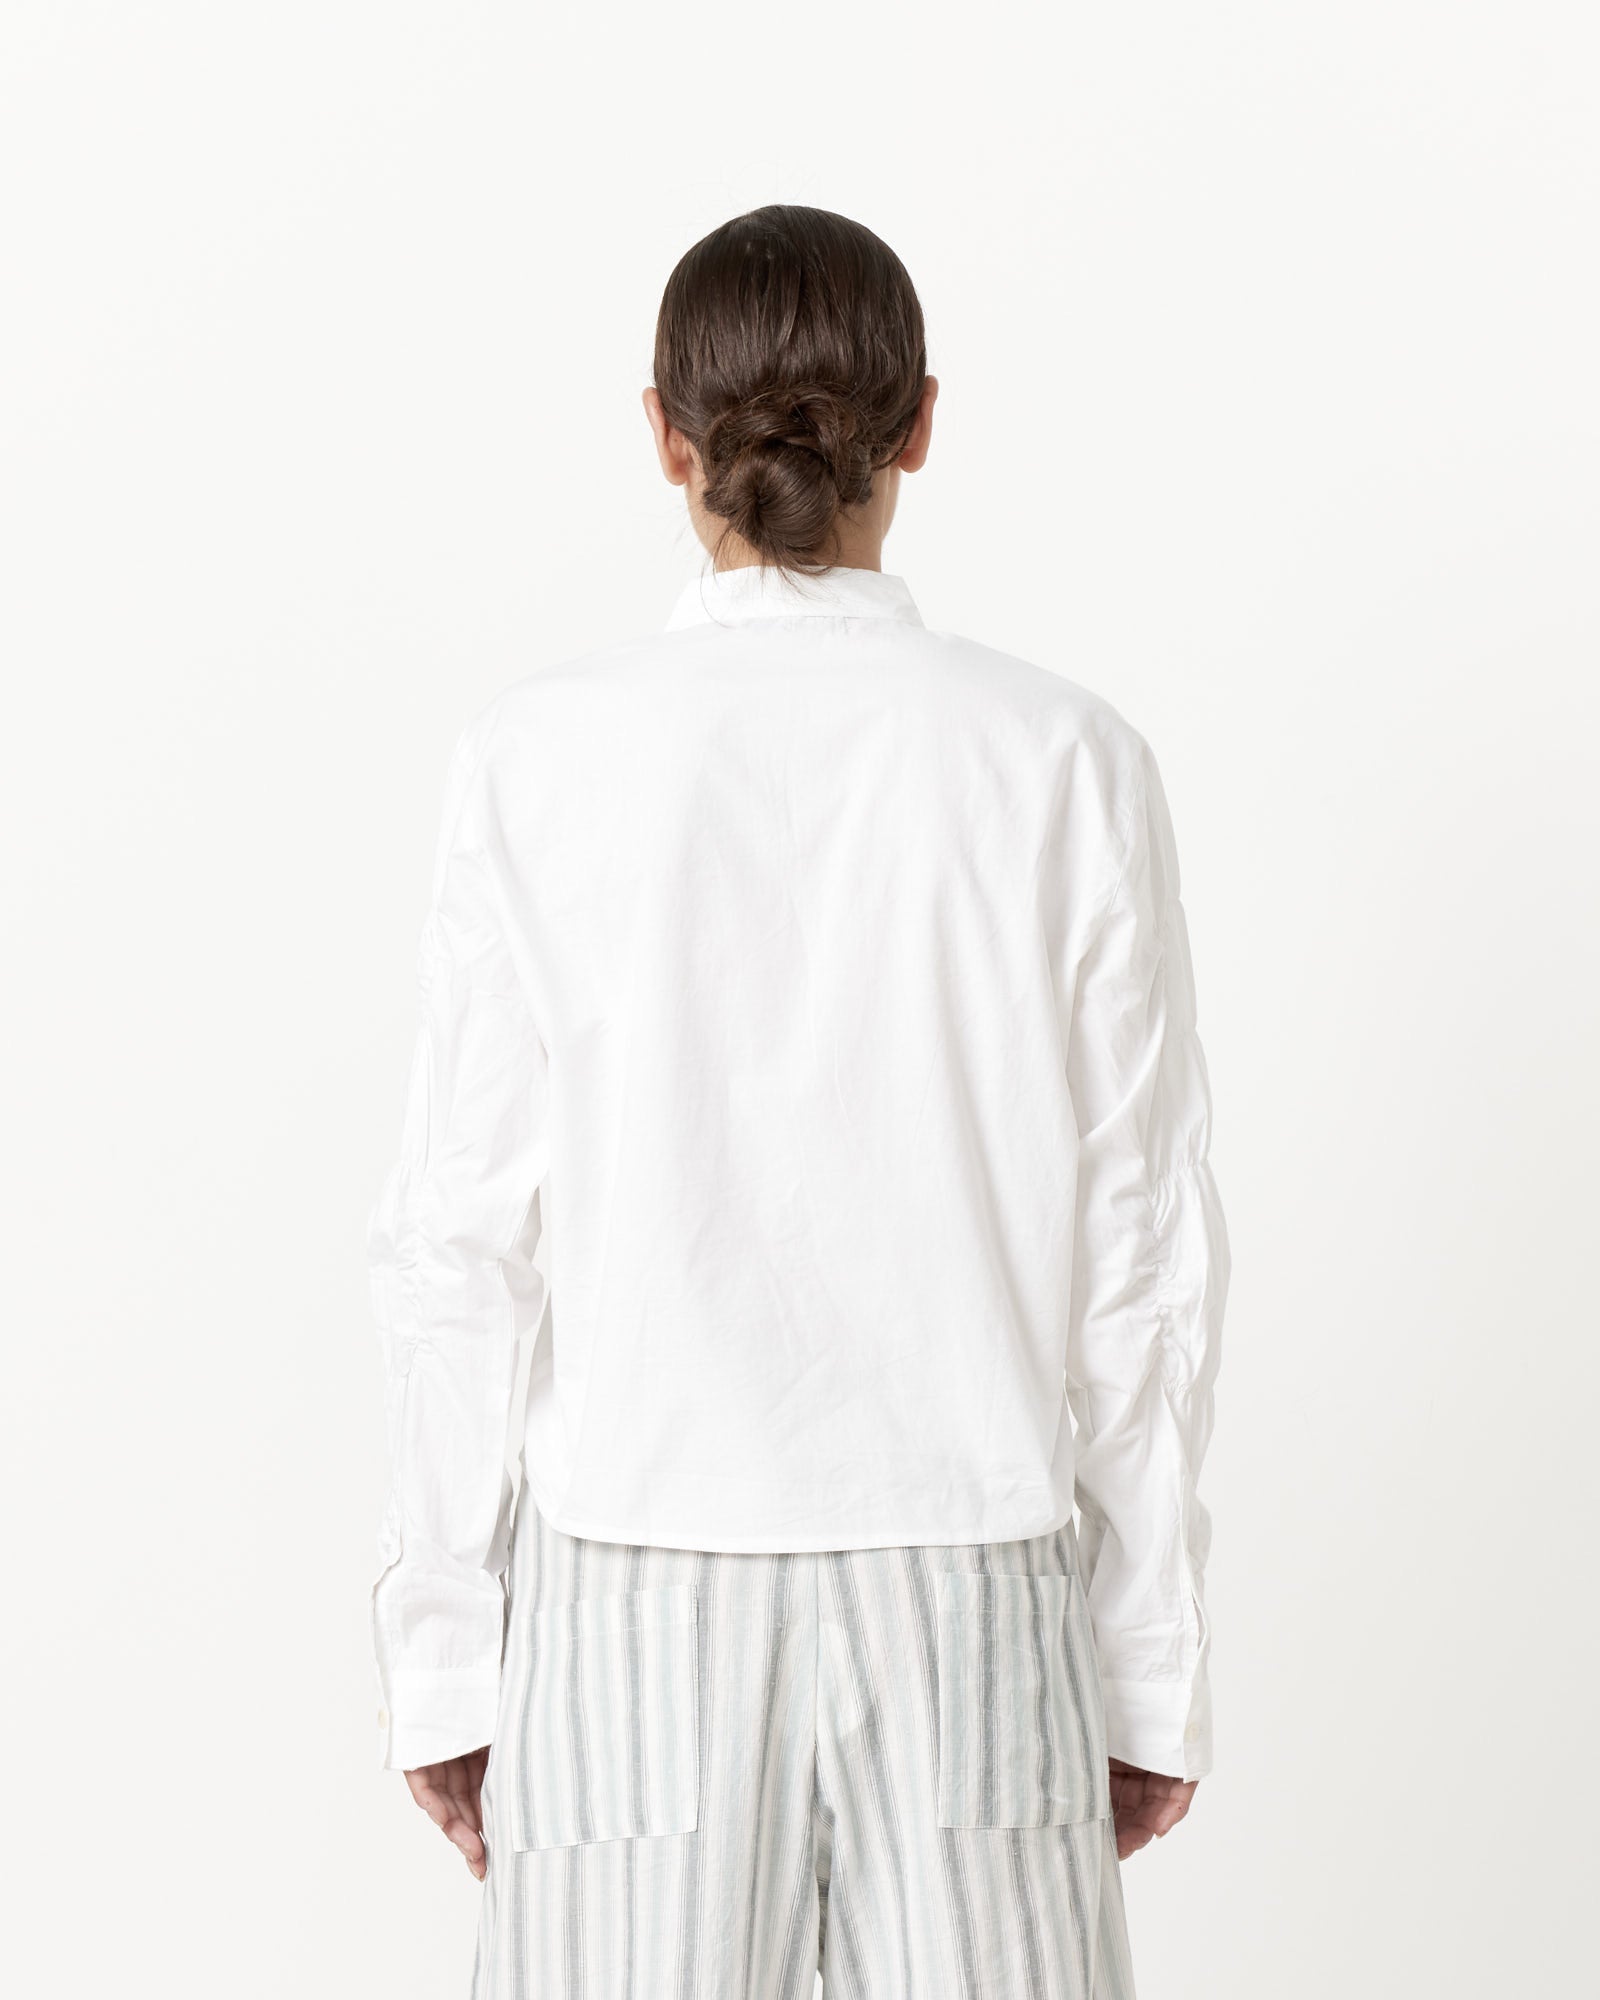 Lupa Shirt in White